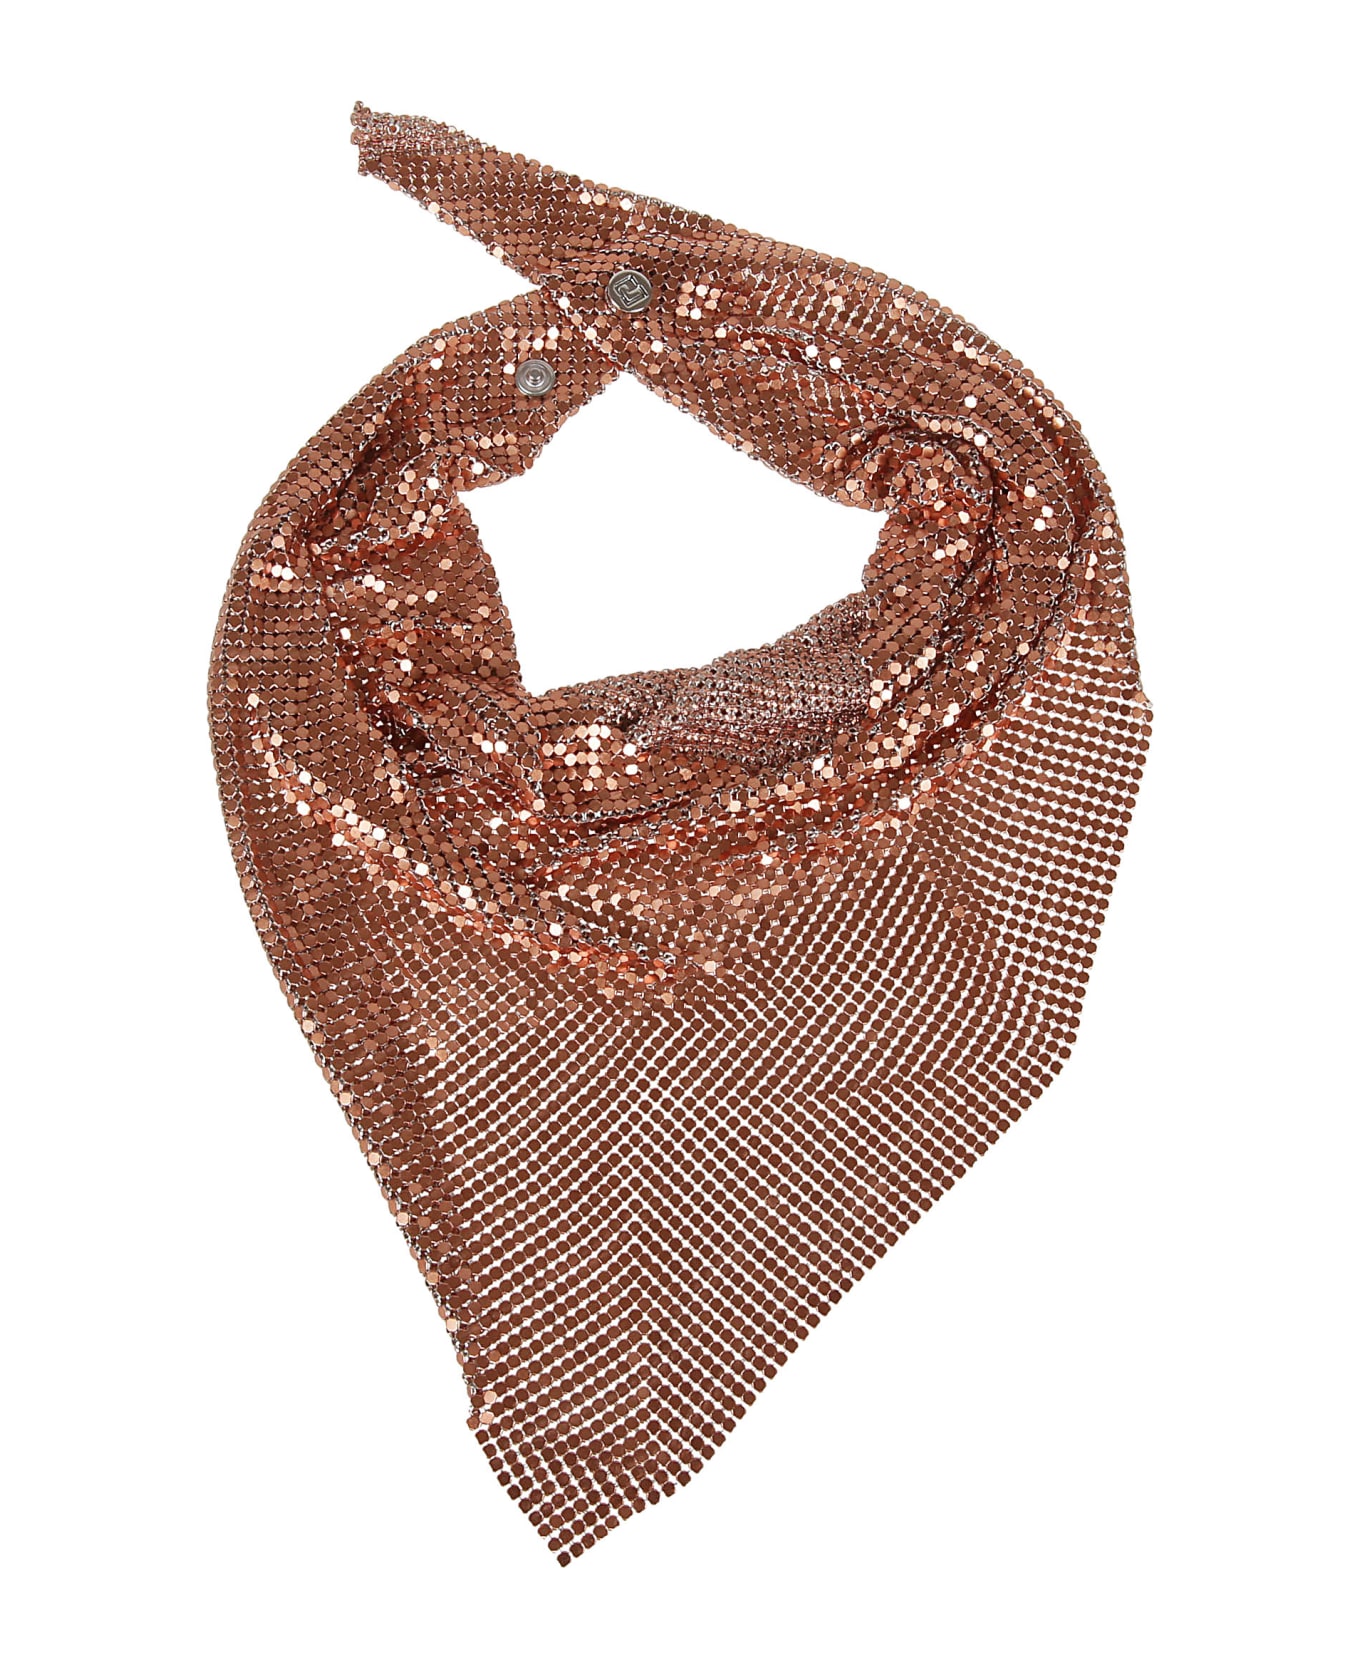 Paco Rabanne Pixel Scarf - Copper